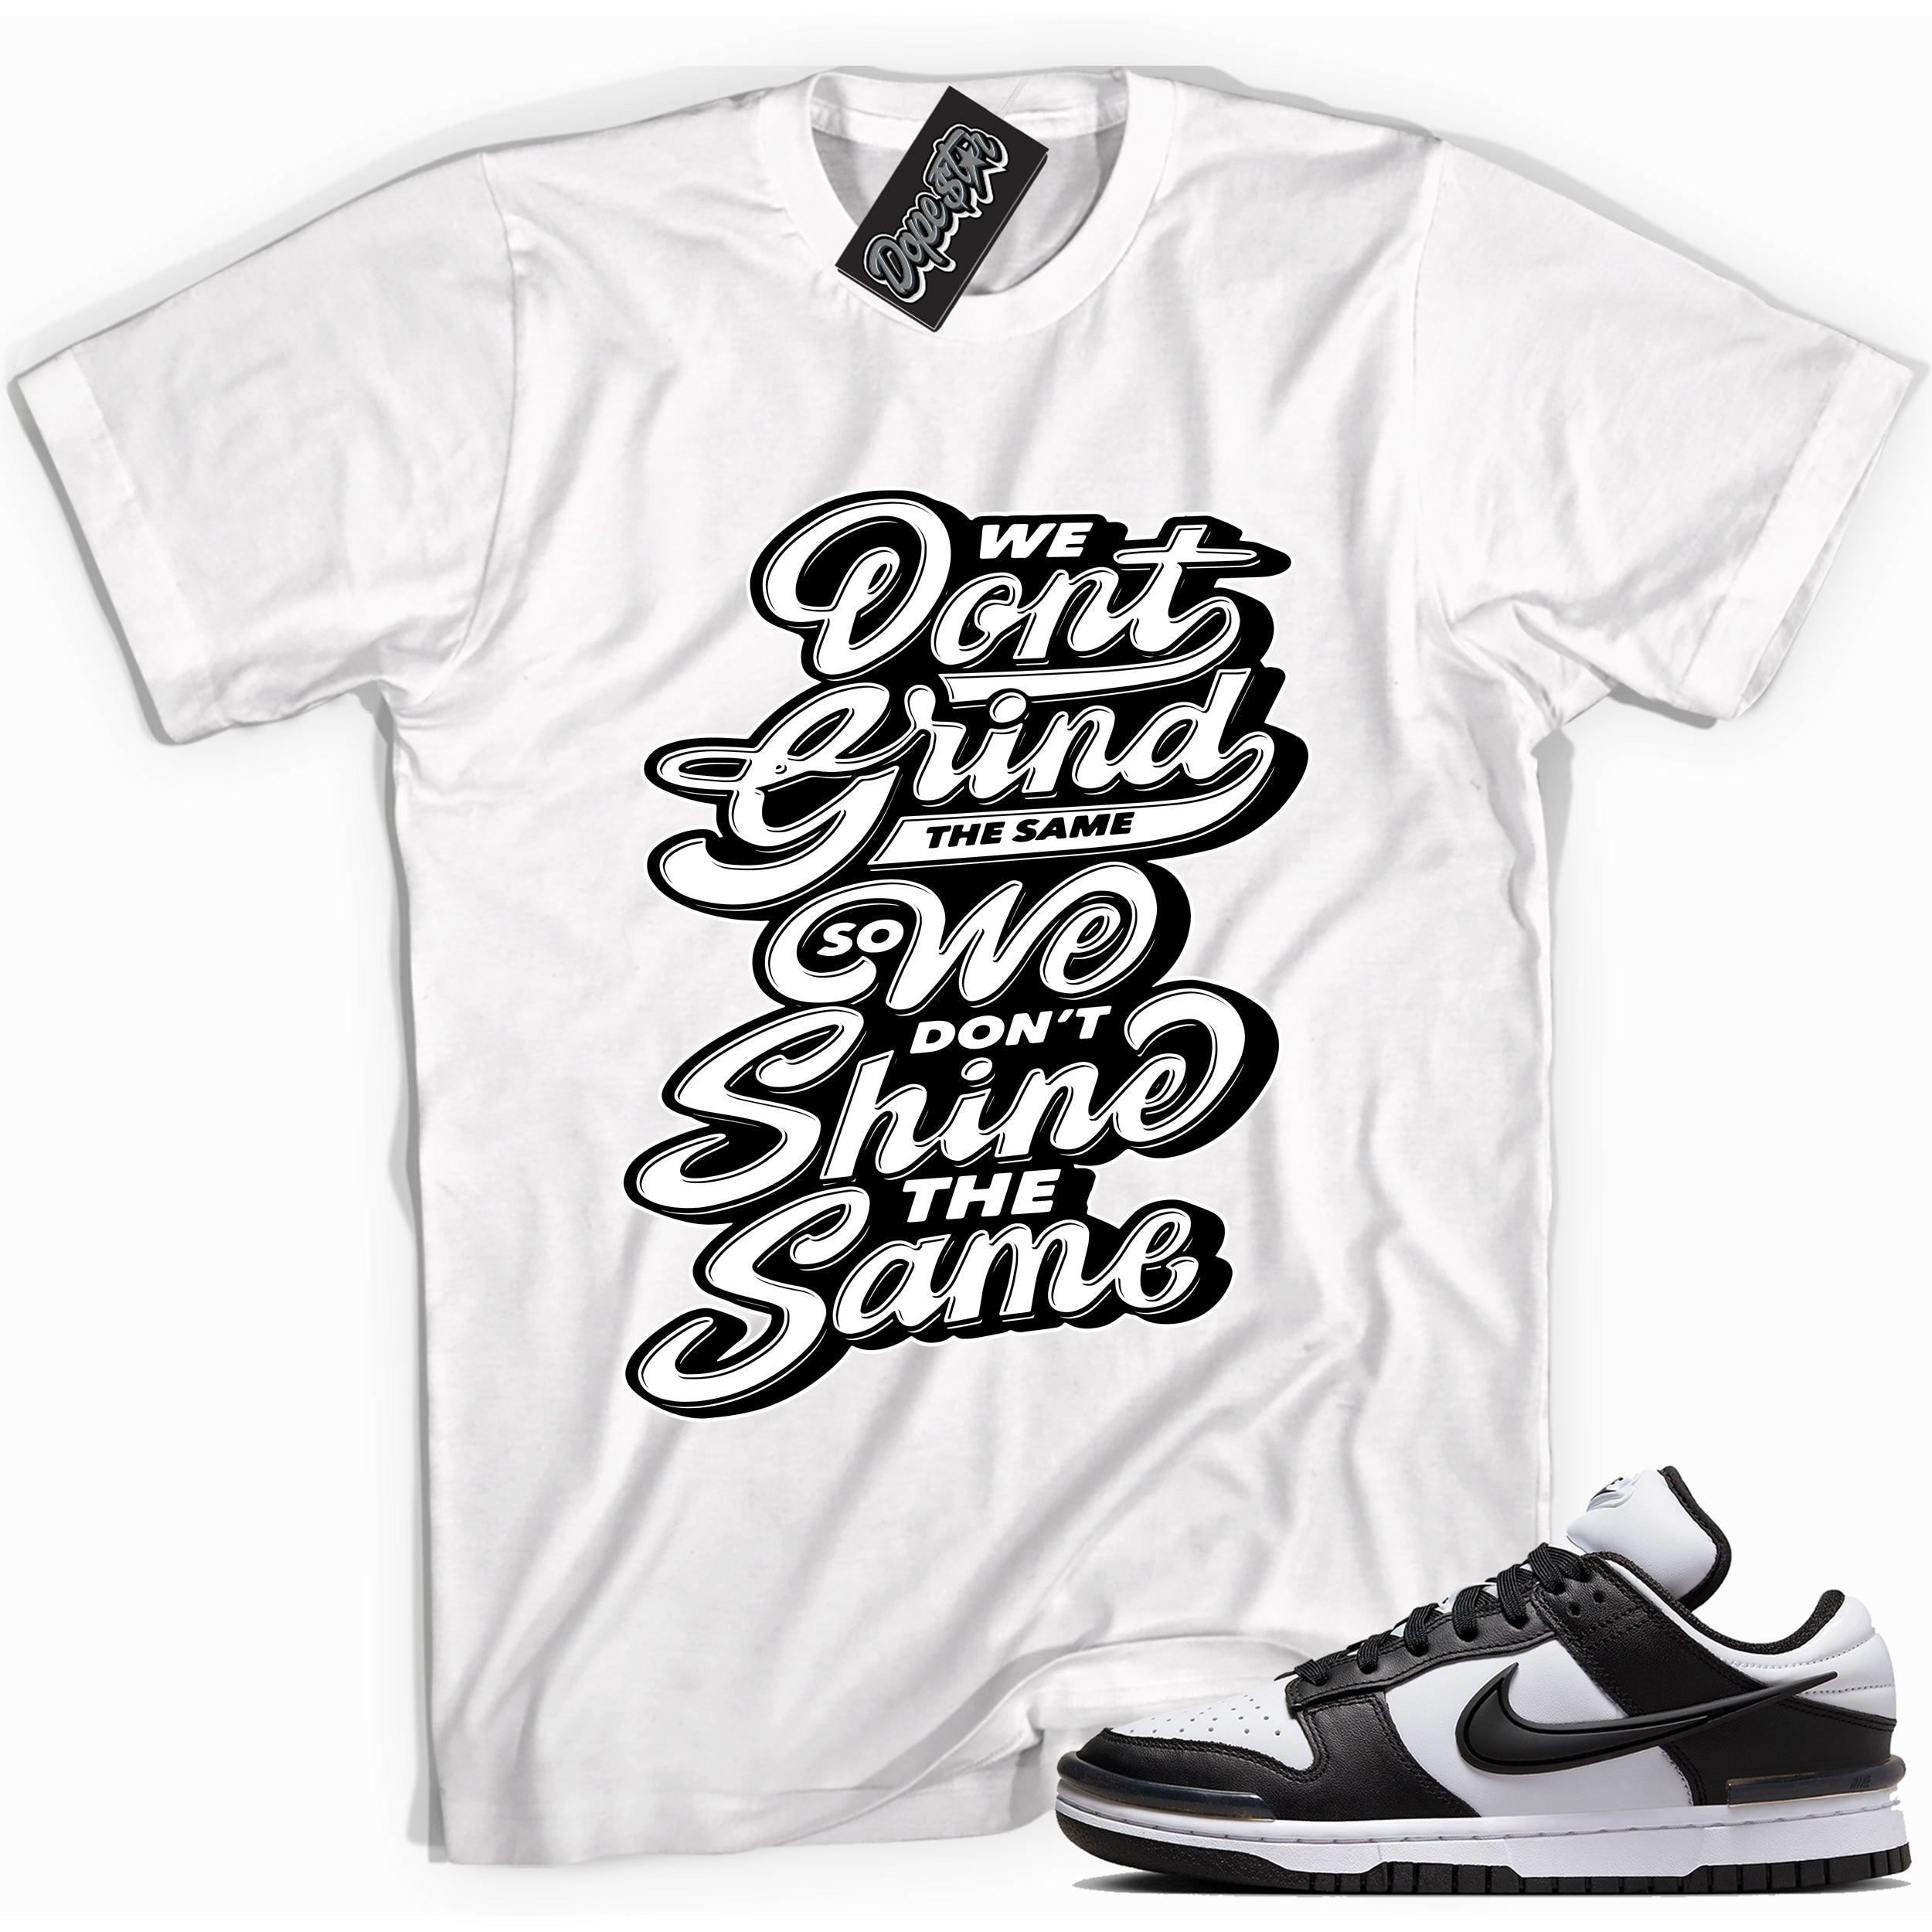 Cool white graphic tee with 'grind shine' print, that perfectly matches Nike Dunk Low Twist Panda sneakers.